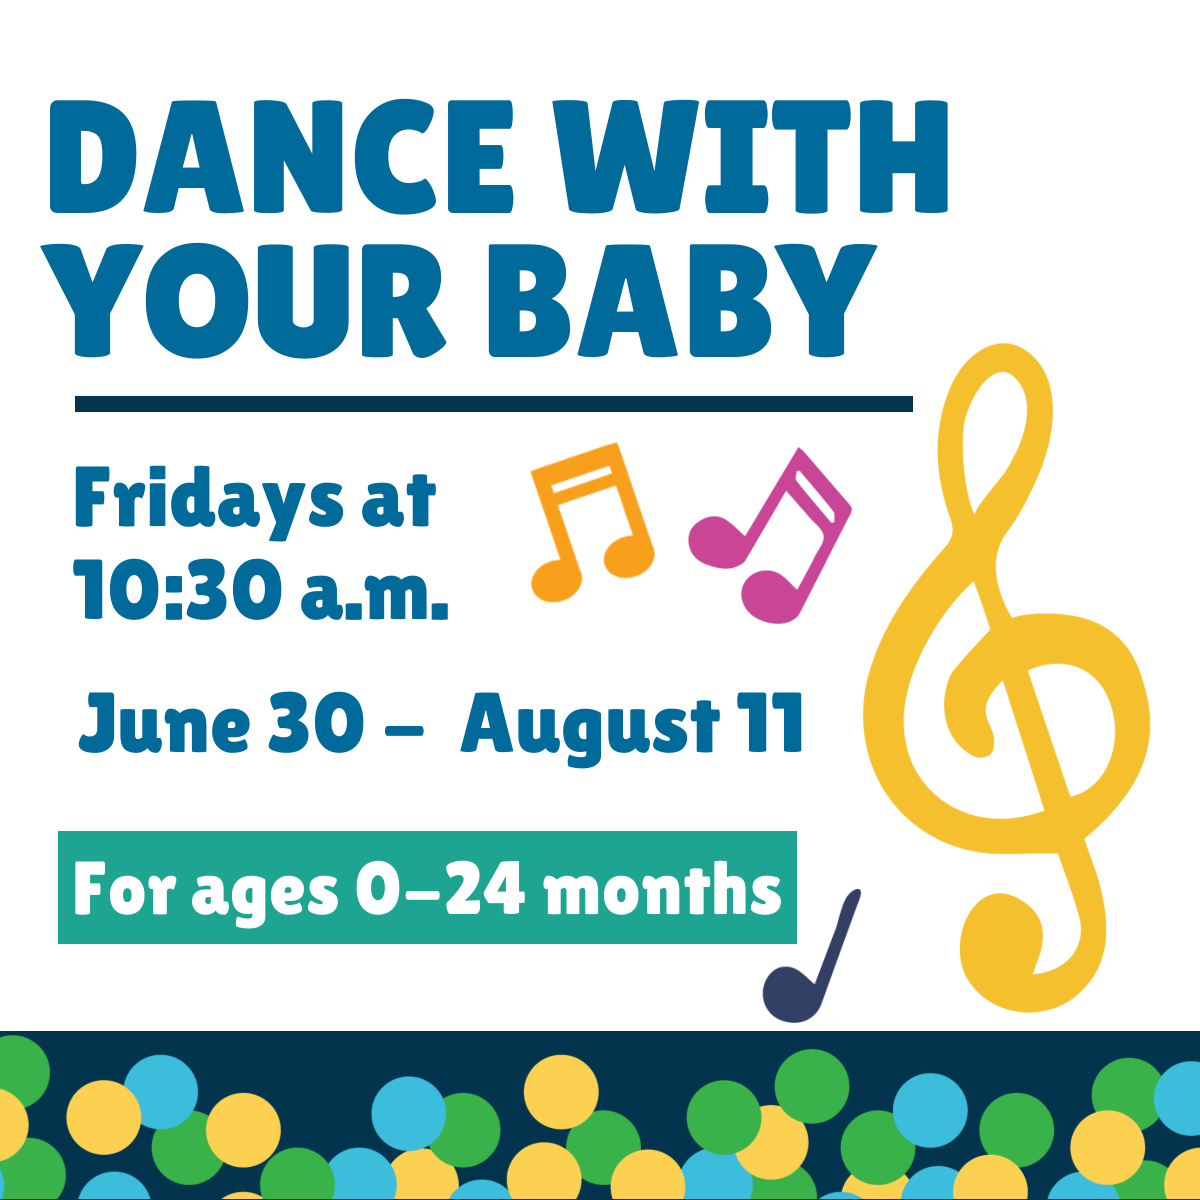 Dance with your baby Fridays at 10:30 a.m. June 30-August 11 For Ages 0-24 months